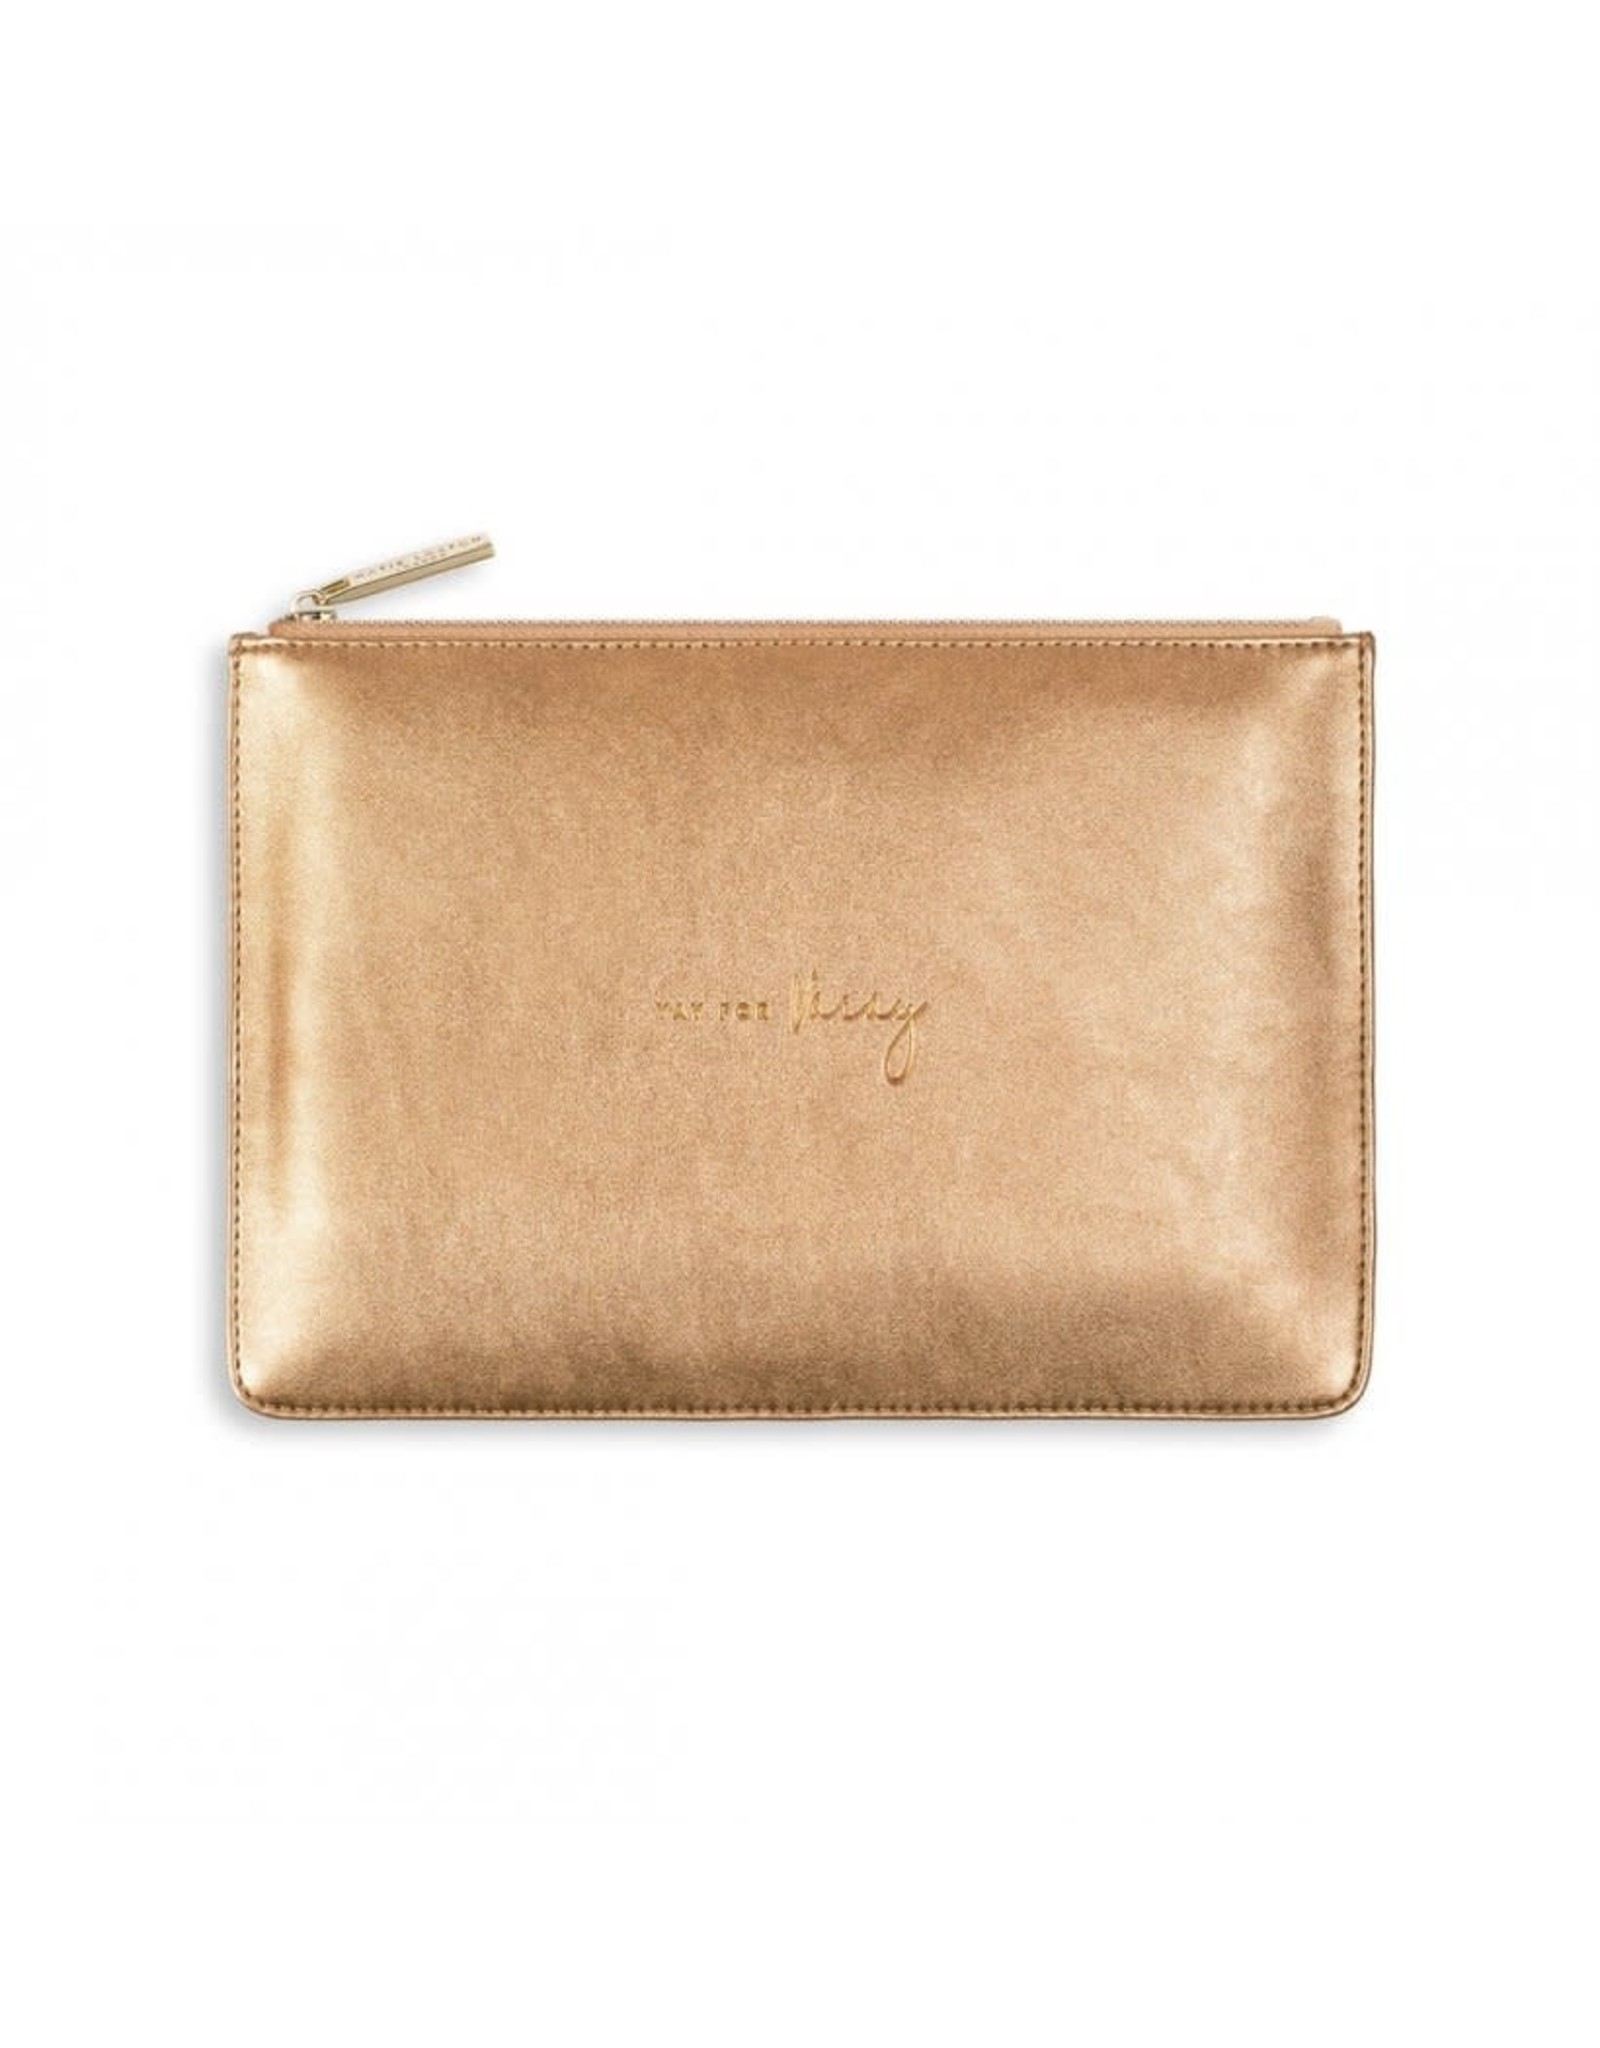 KATIE LOXTON PERF POUCH YAY FOR VACAY